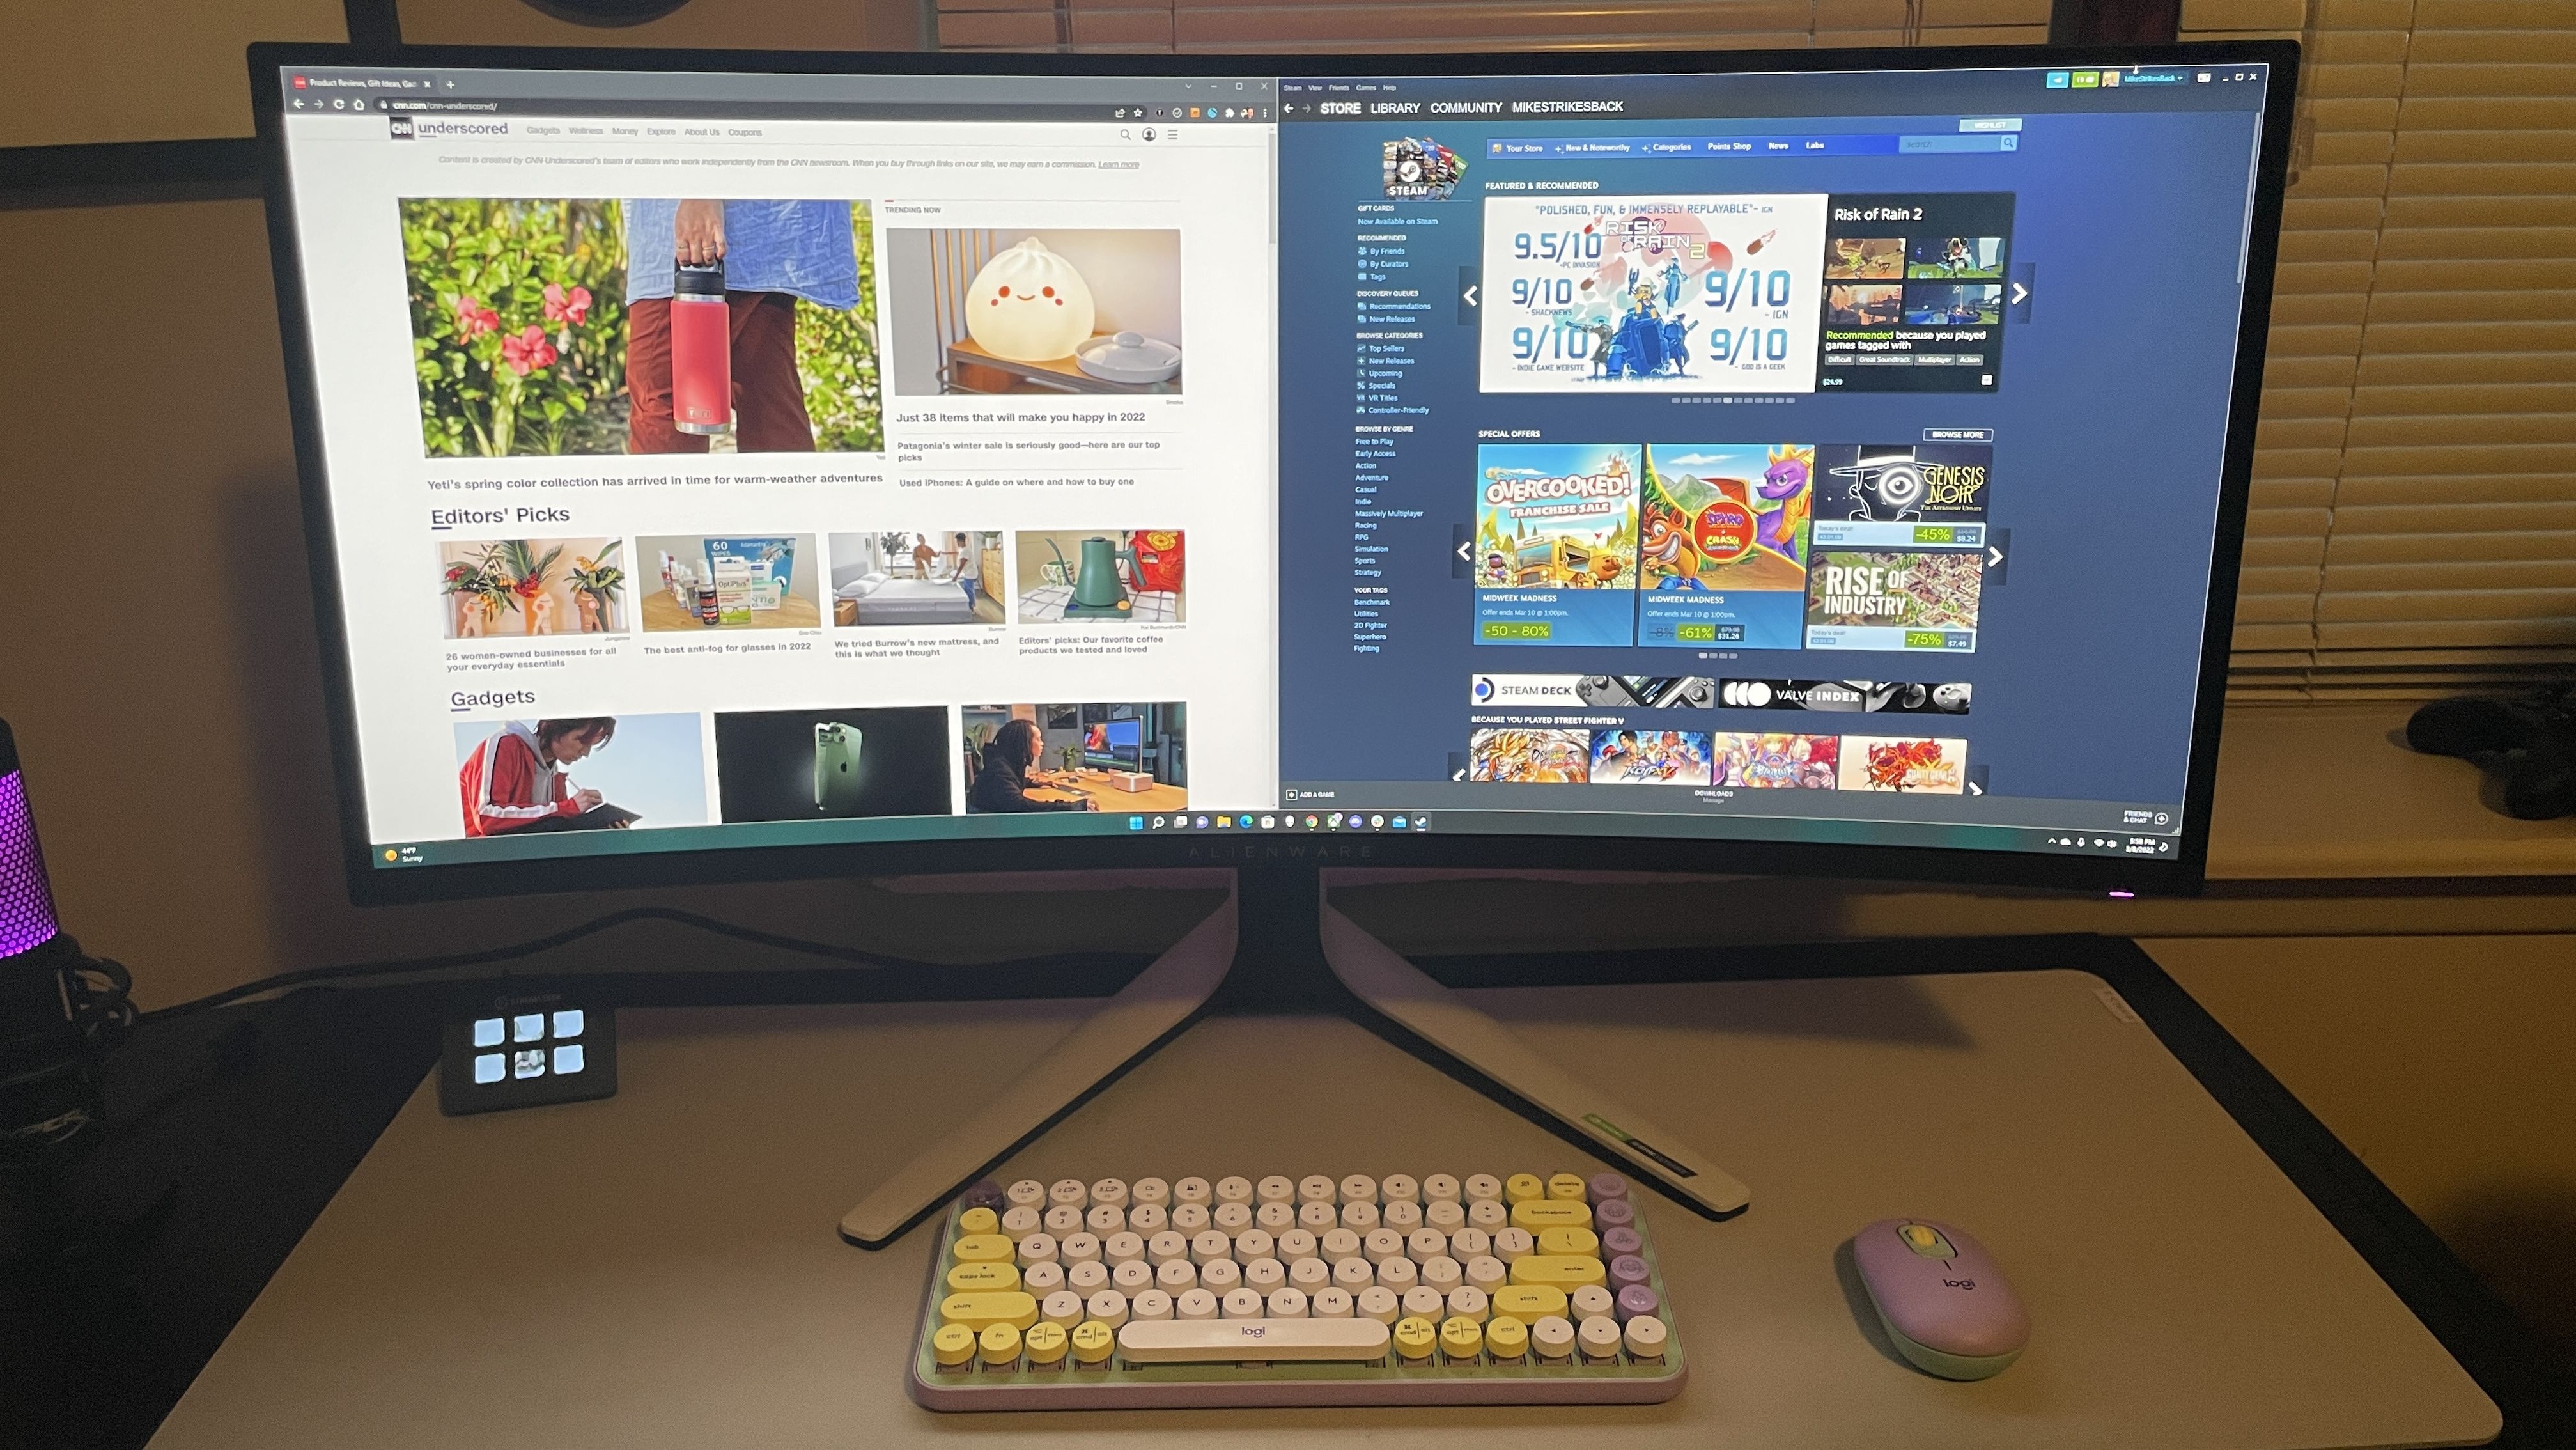 Ultrawide vs. dual monitors: which should you buy?